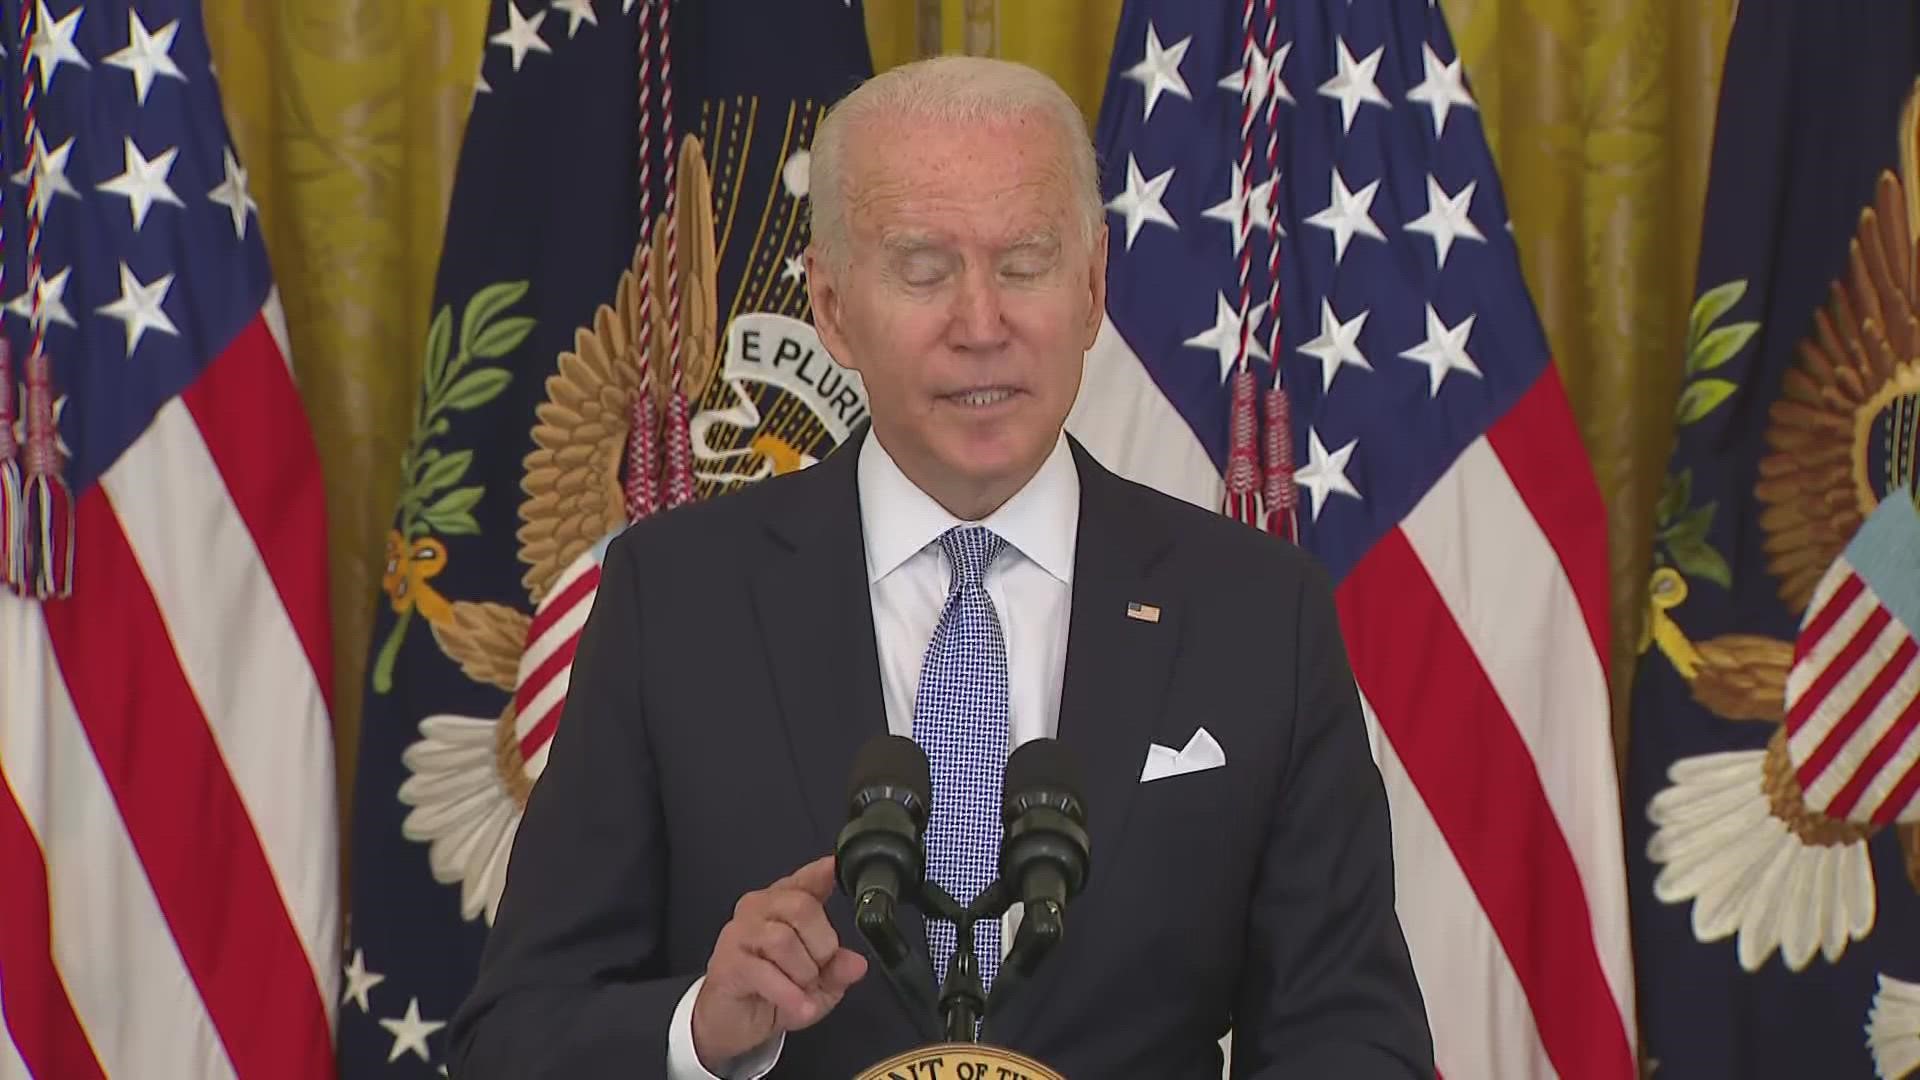 In an effort to get more Americans vaccinated against COVID, President Joe Biden urged businesses Thursday to offer paid time off to get the vaccine.